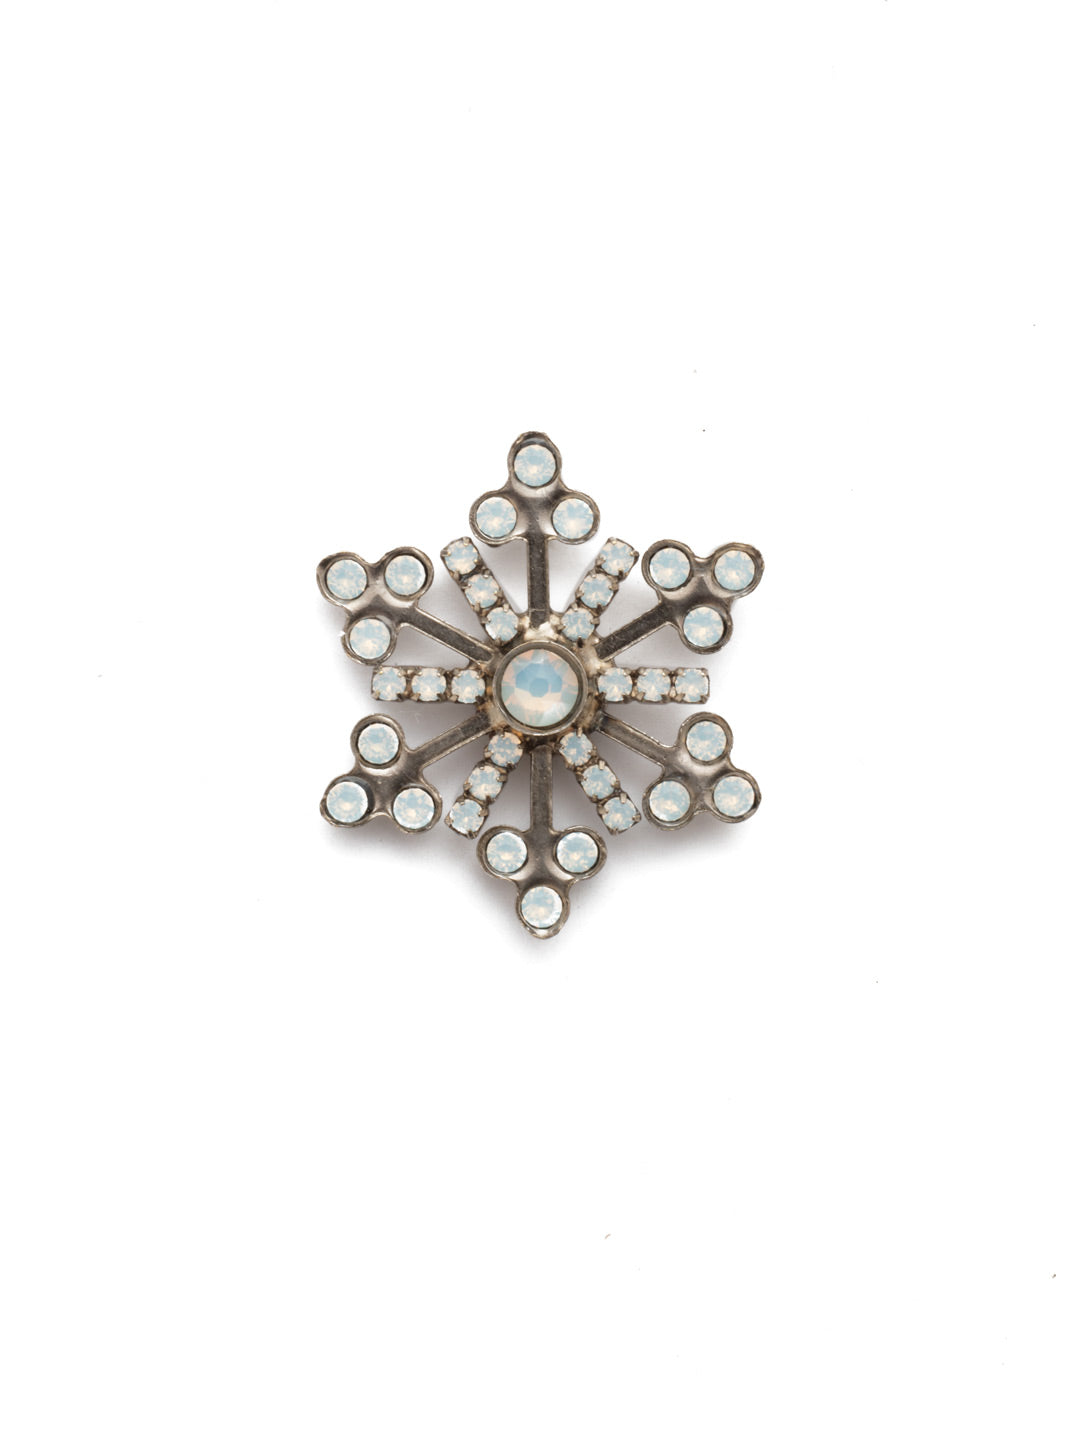 Alba Magnetic Charm - CHM8ASWO - <p>A snowflake Magnetic charm is just what you need this holiday seaso and is engulfed in beautiful petite cyrstals. Your bag, blazer, dress or refrigerator will now have the perfect shine. From Sorrelli's White Opal collection in our Antique Silver-tone finish.</p>